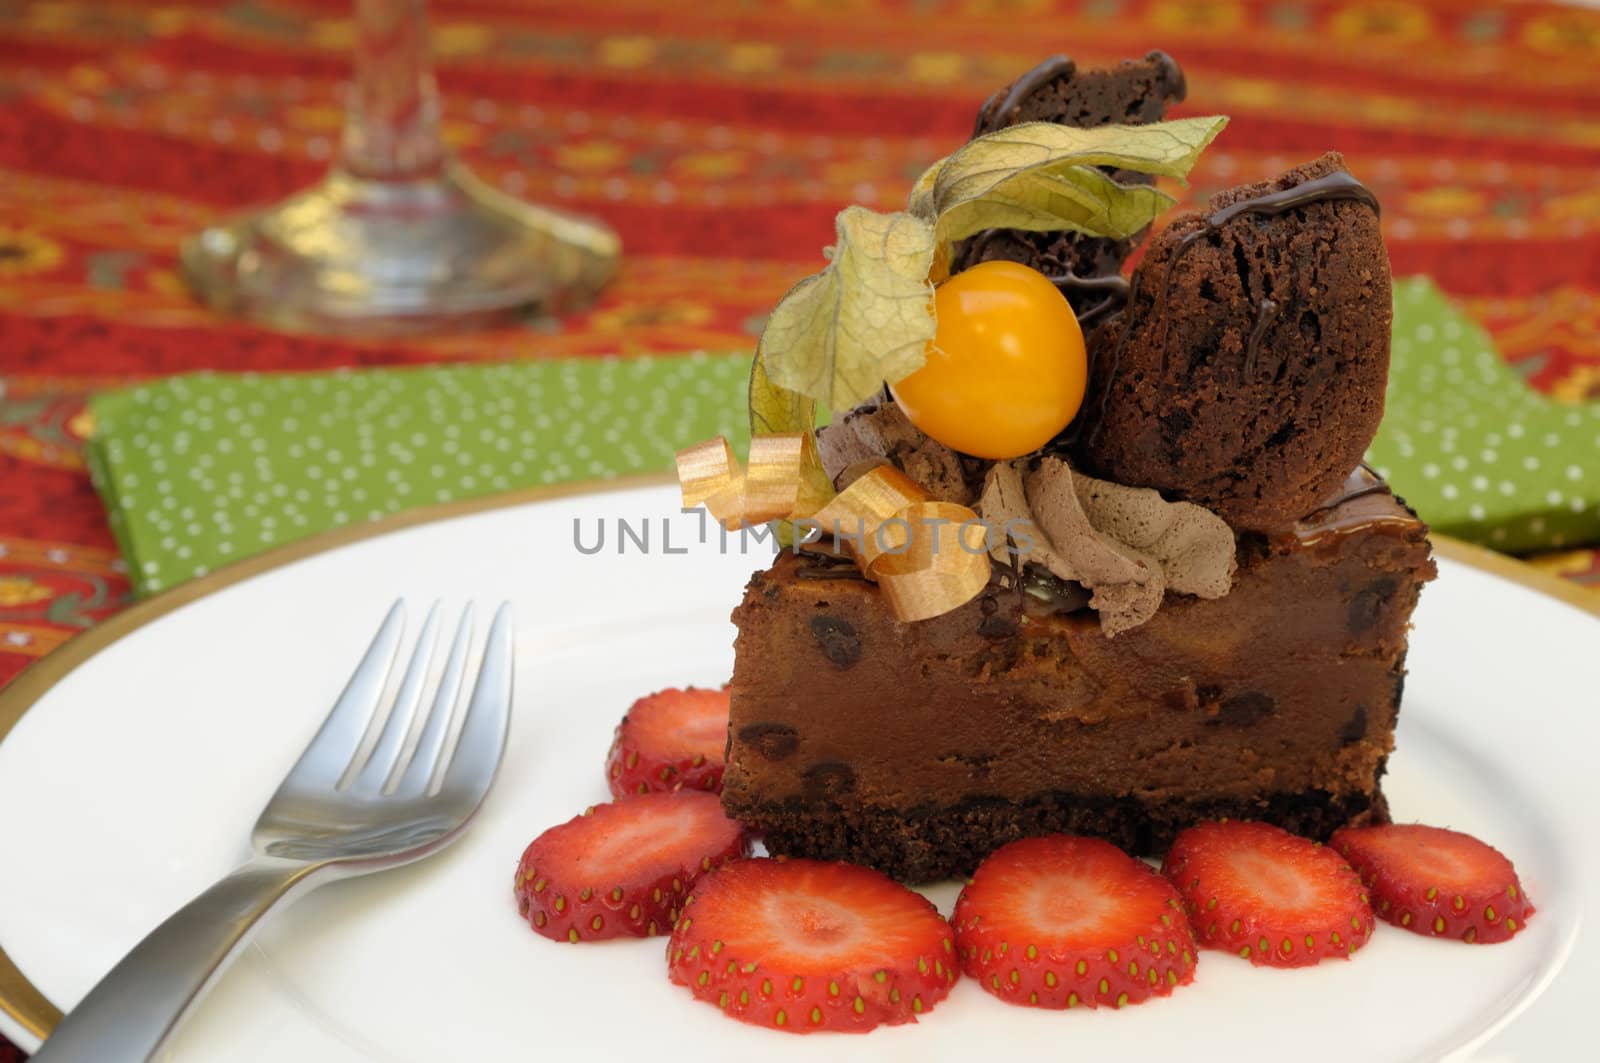 Chocolate cake with fruits by Hbak